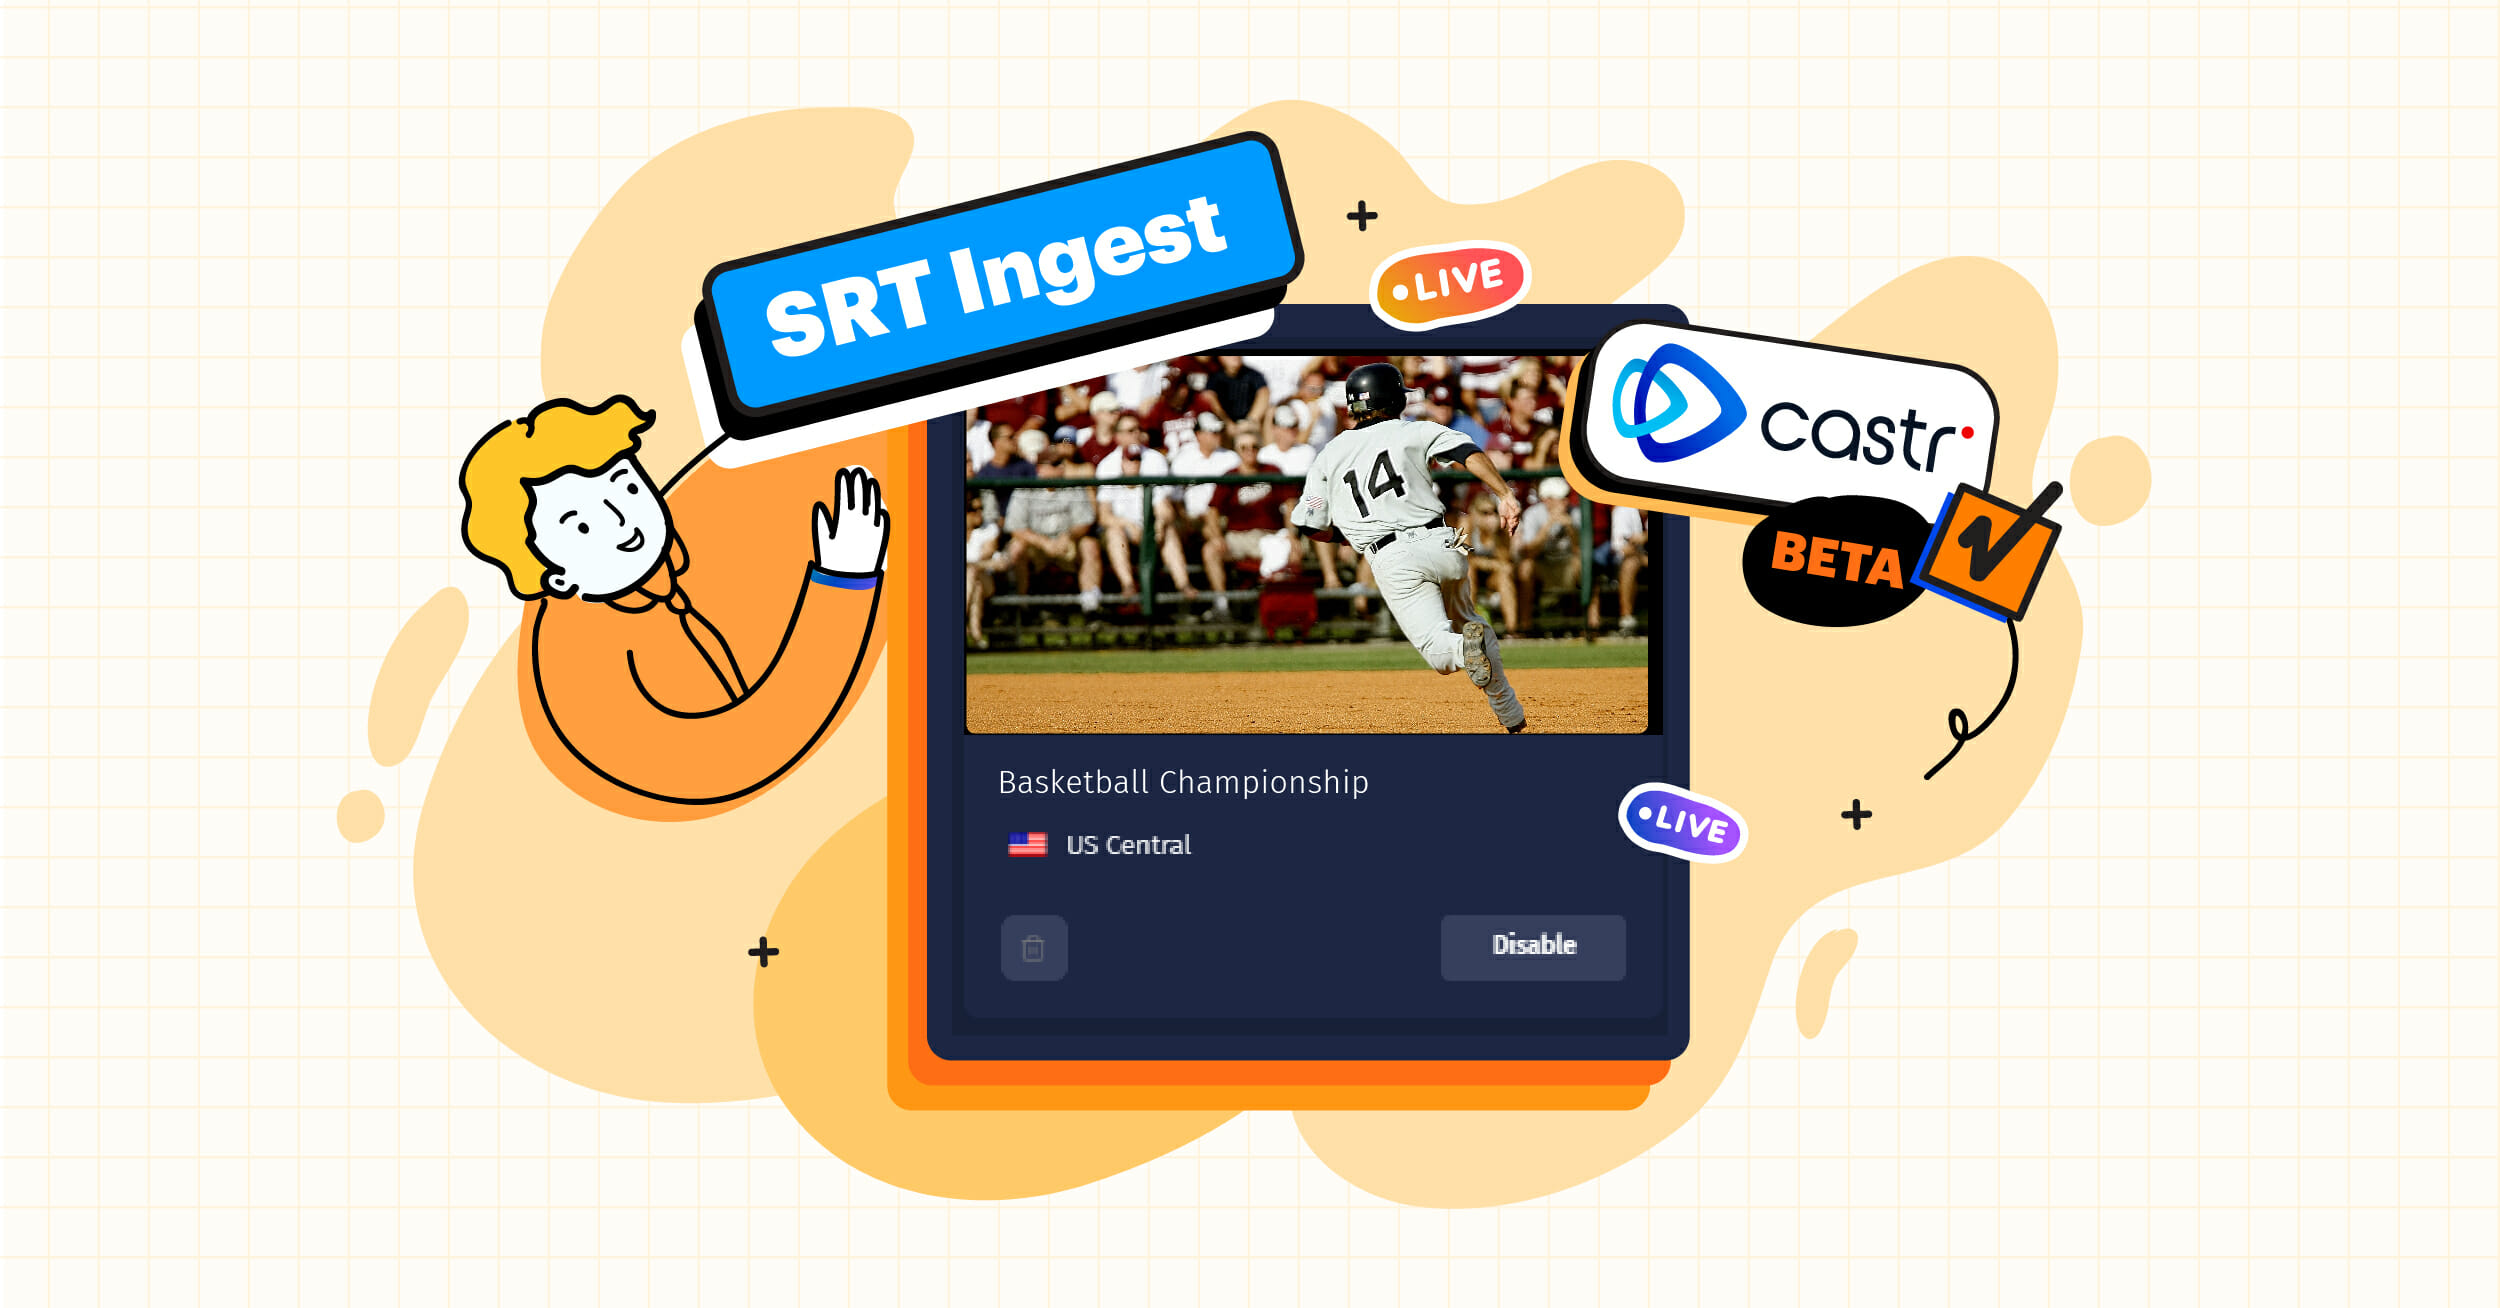 Castr Now Supports SRT Streaming Protocol